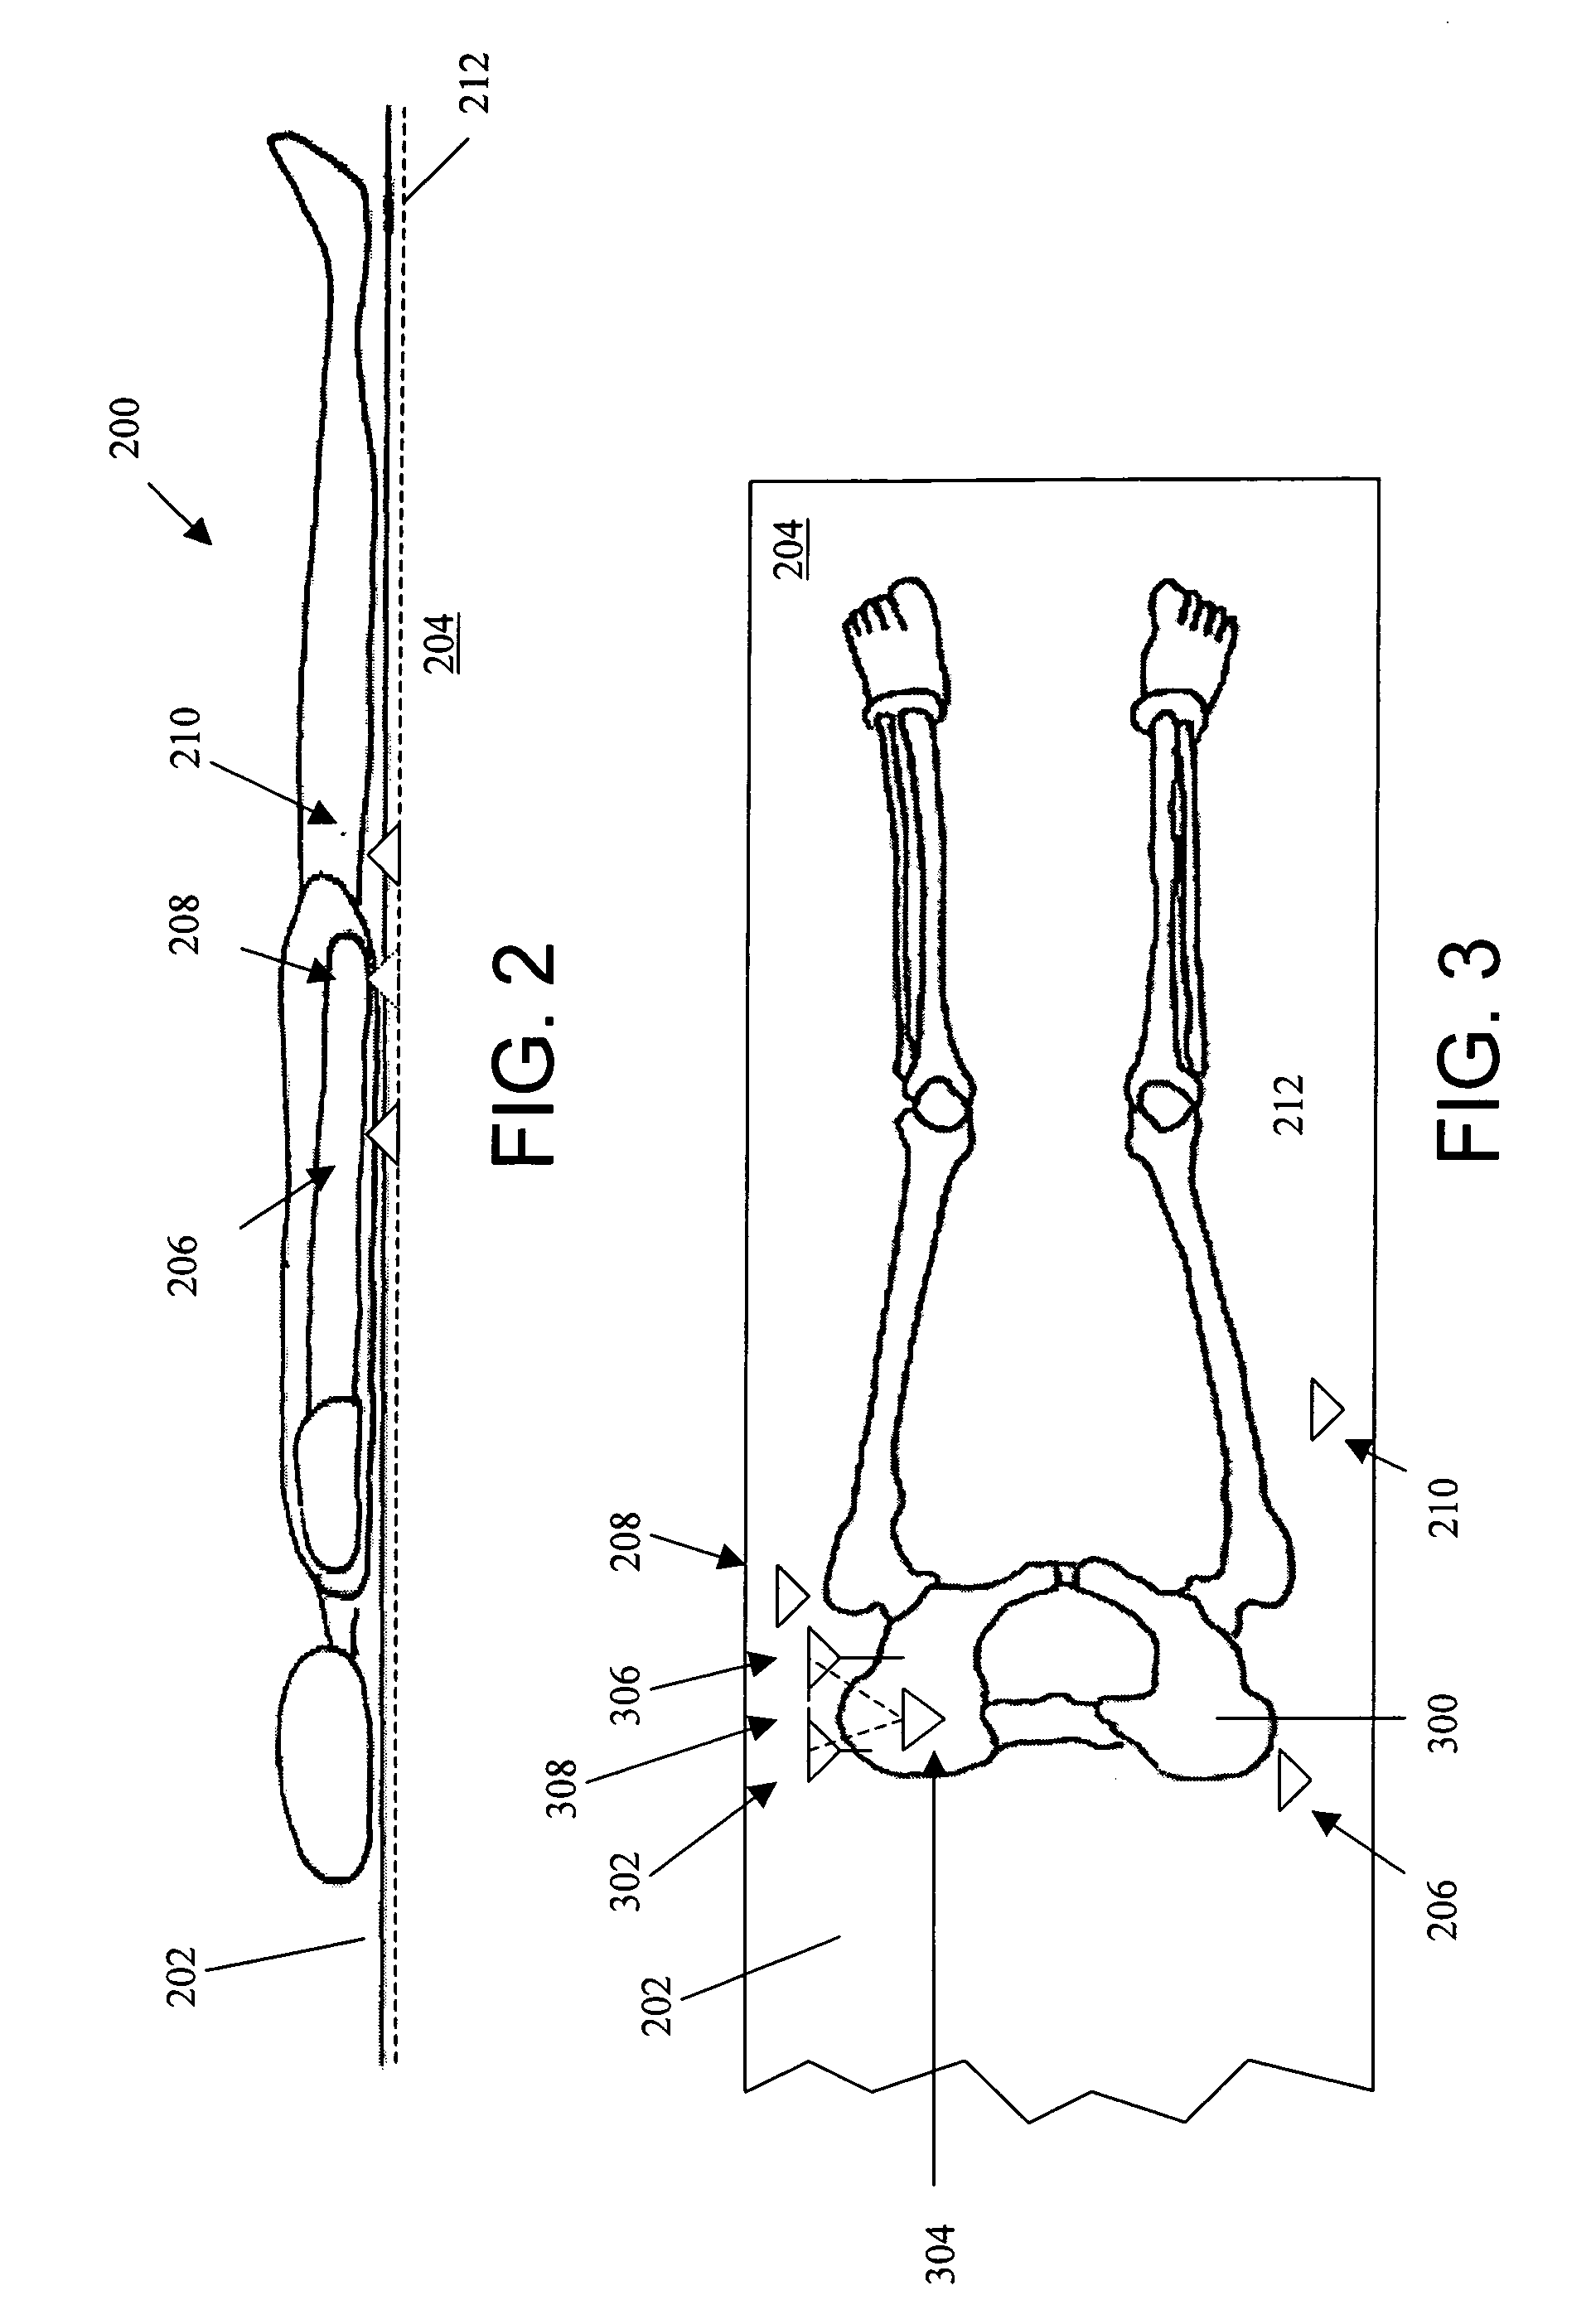 Systems and methods for providing a reference plane for mounting an acetabular cup during a computer-aided surgery